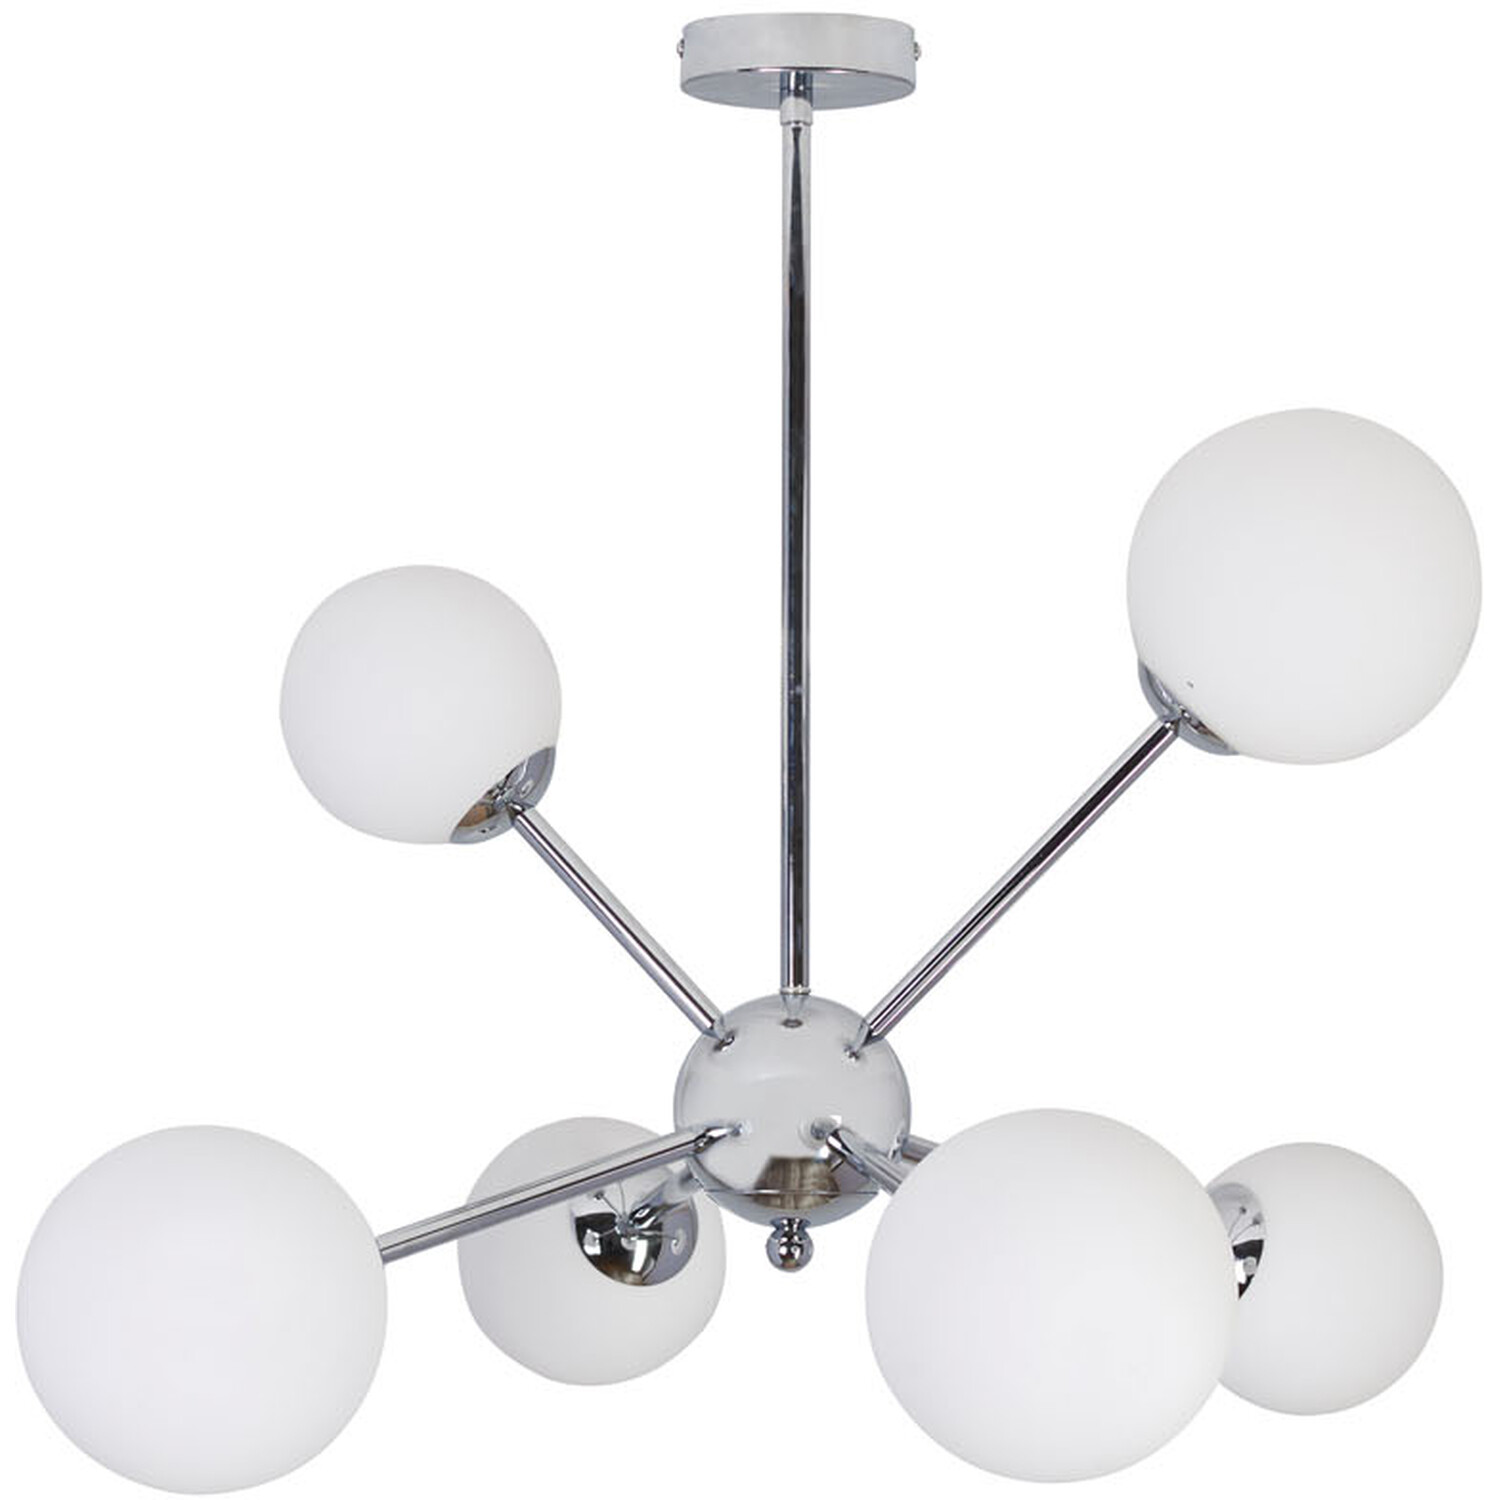 Astrid Silver 6 Light Ceiling Fitting Image 1